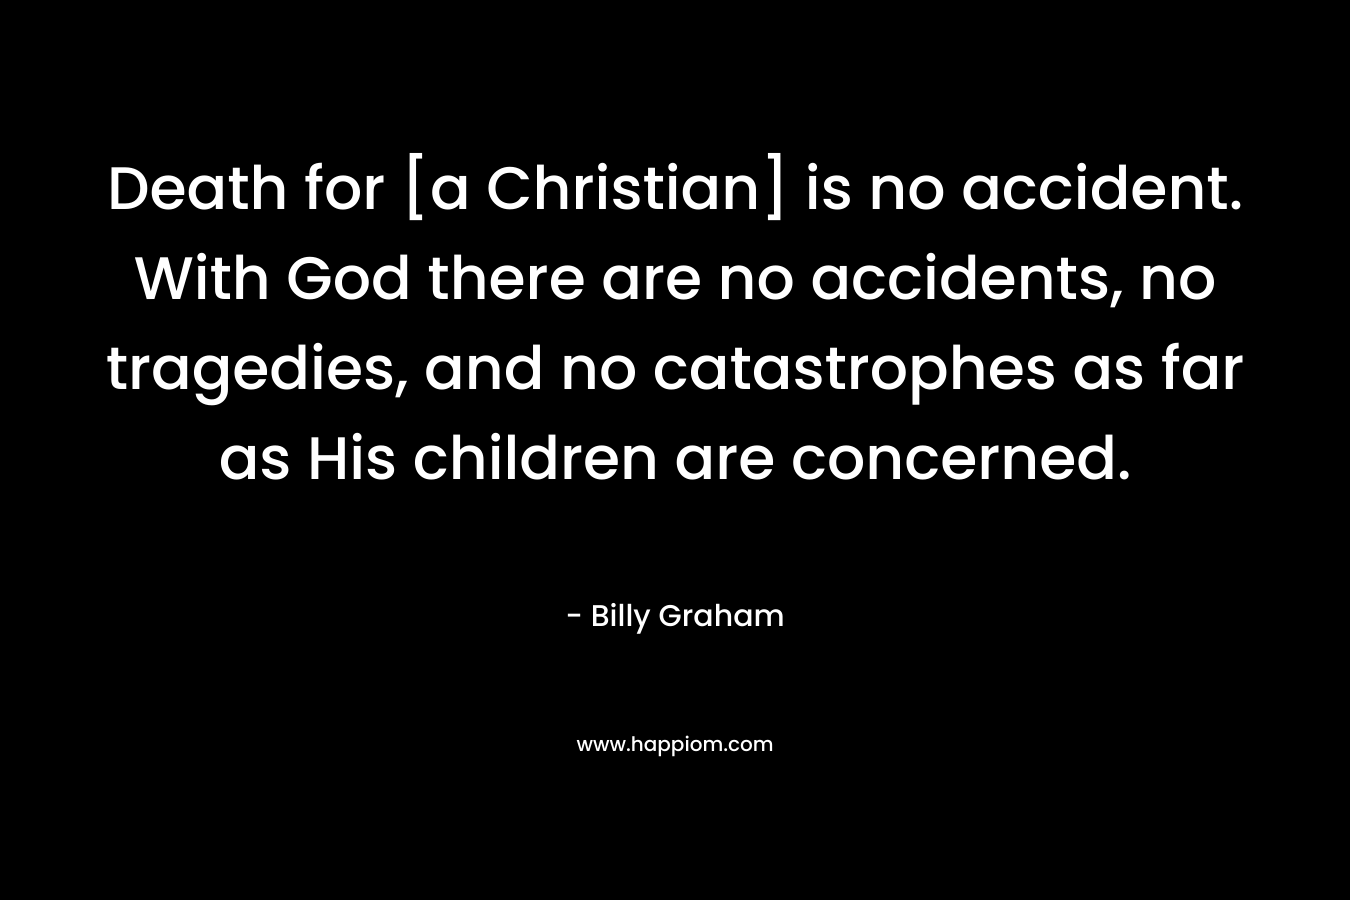 Death for [a Christian] is no accident. With God there are no accidents, no tragedies, and no catastrophes as far as His children are concerned.